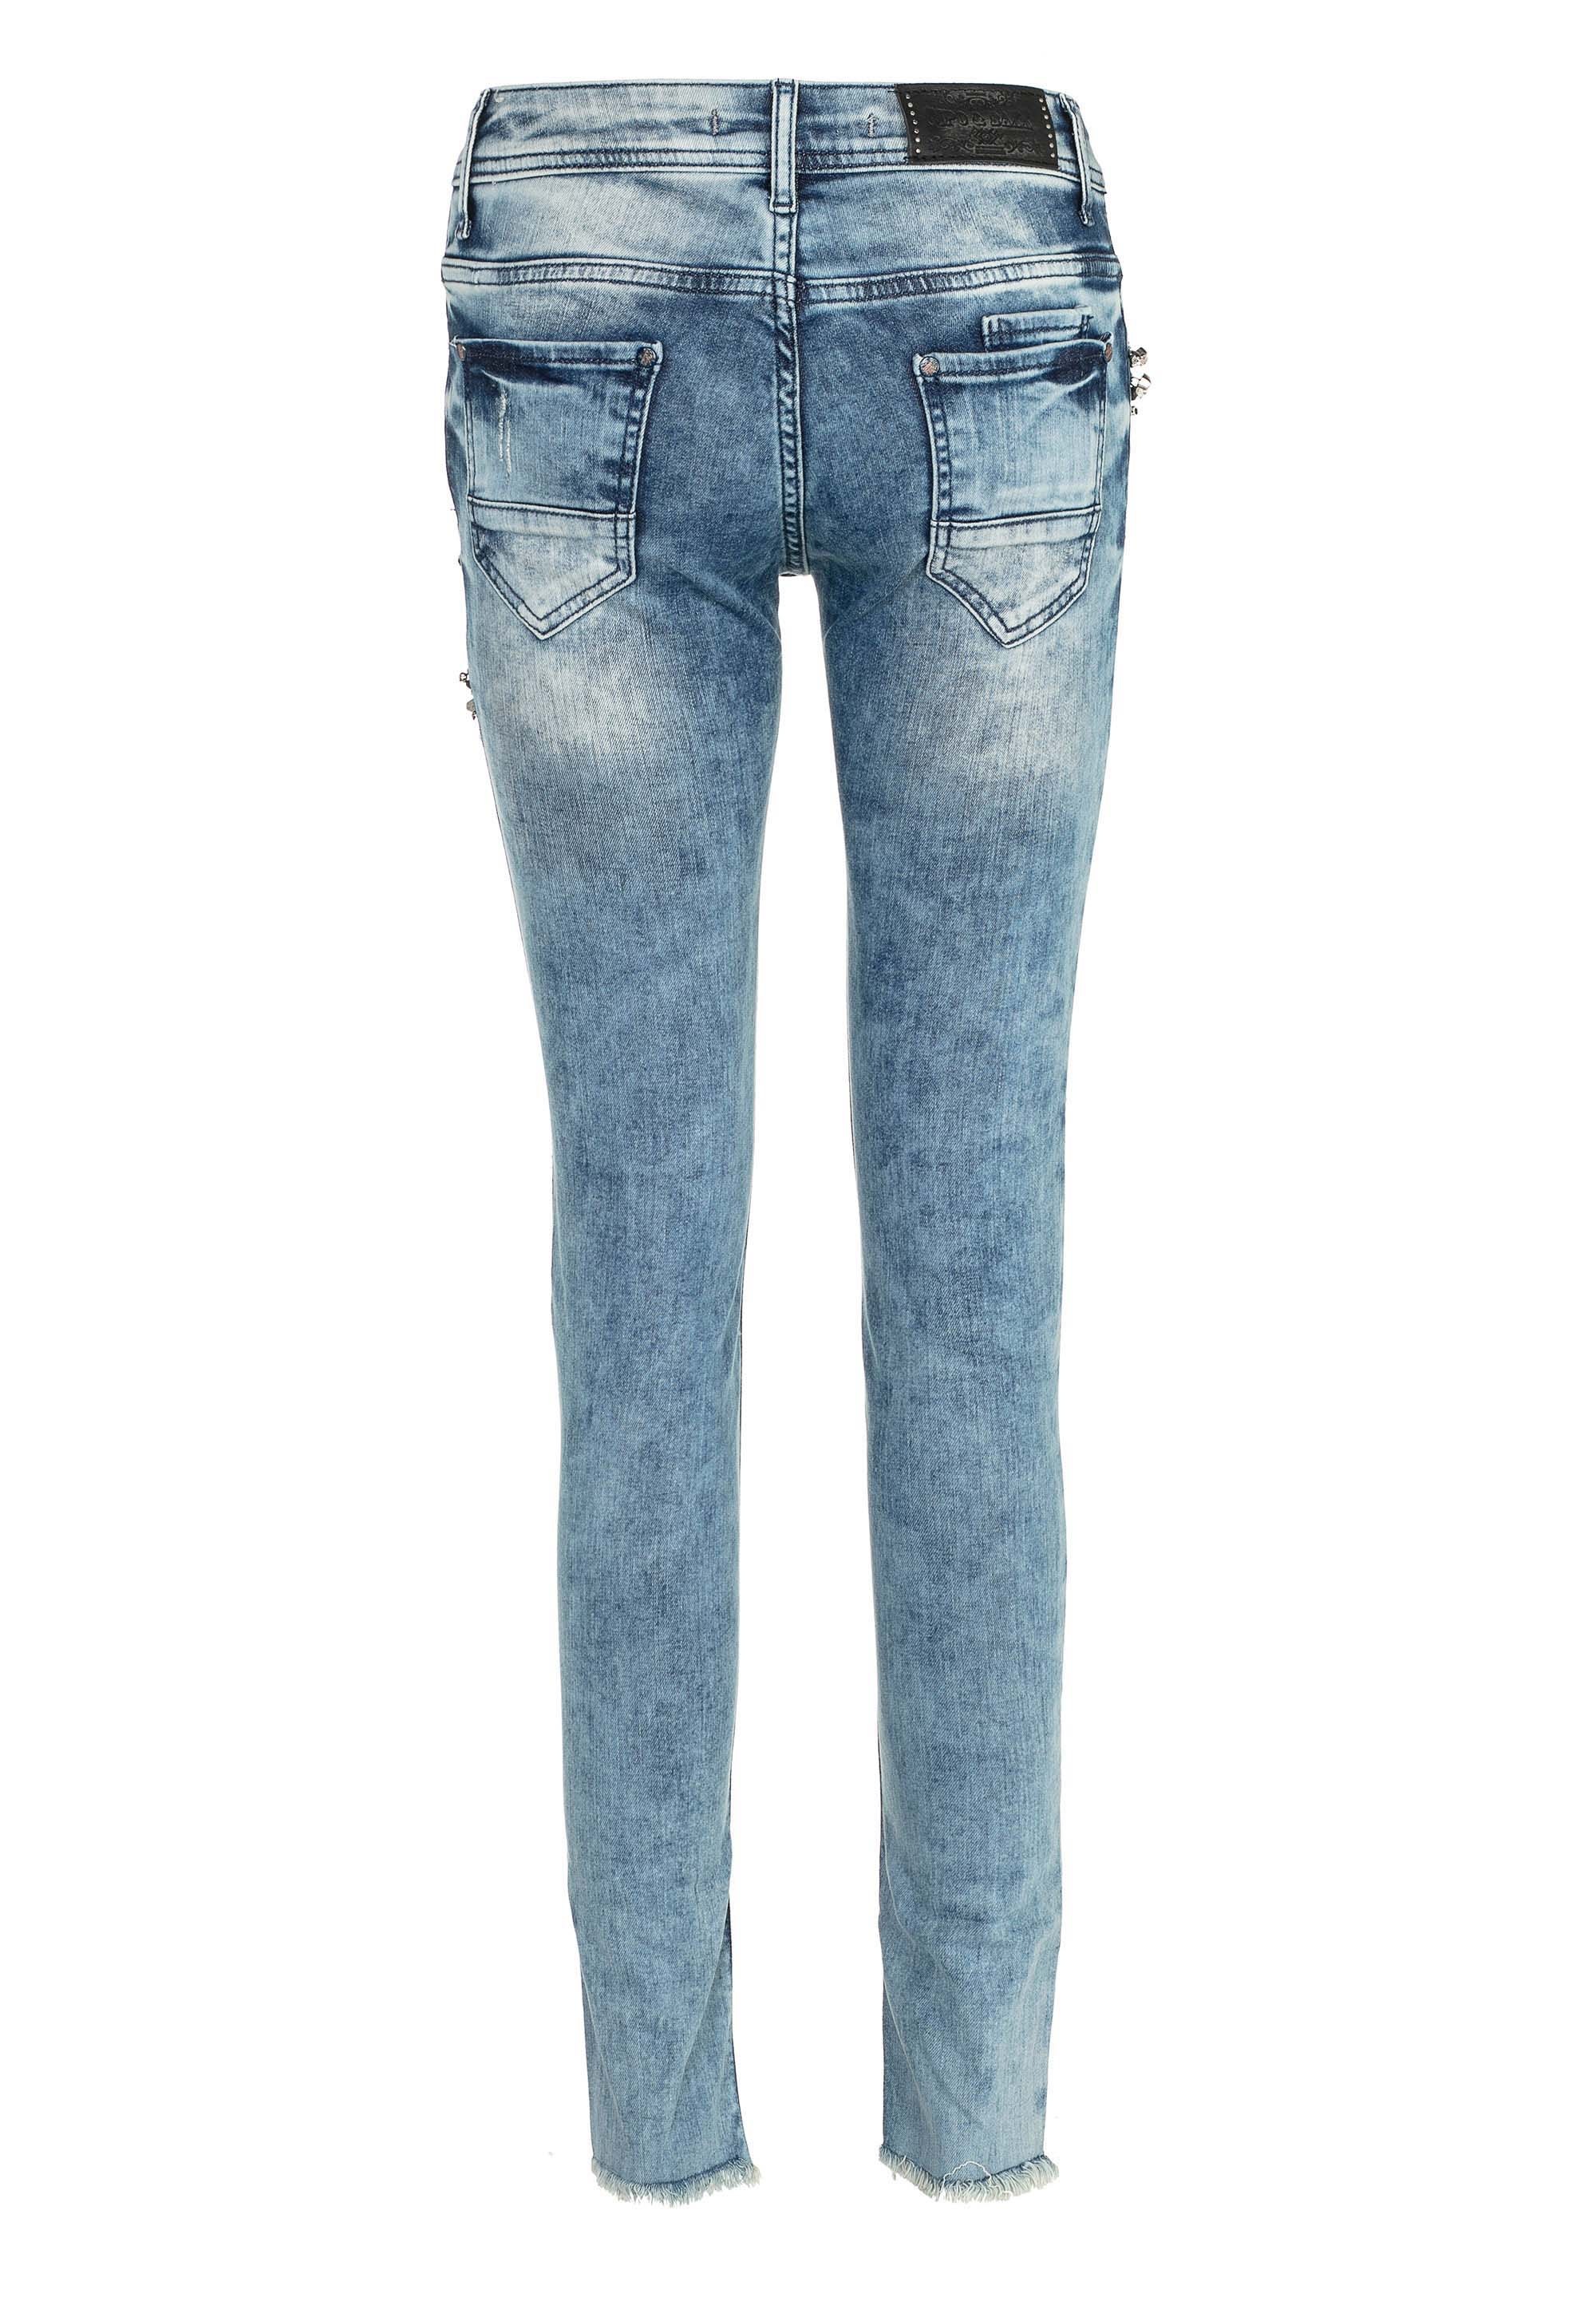 Cipo & Baxx Slim-fit-Jeans, im stylishen Patched-Up-Look